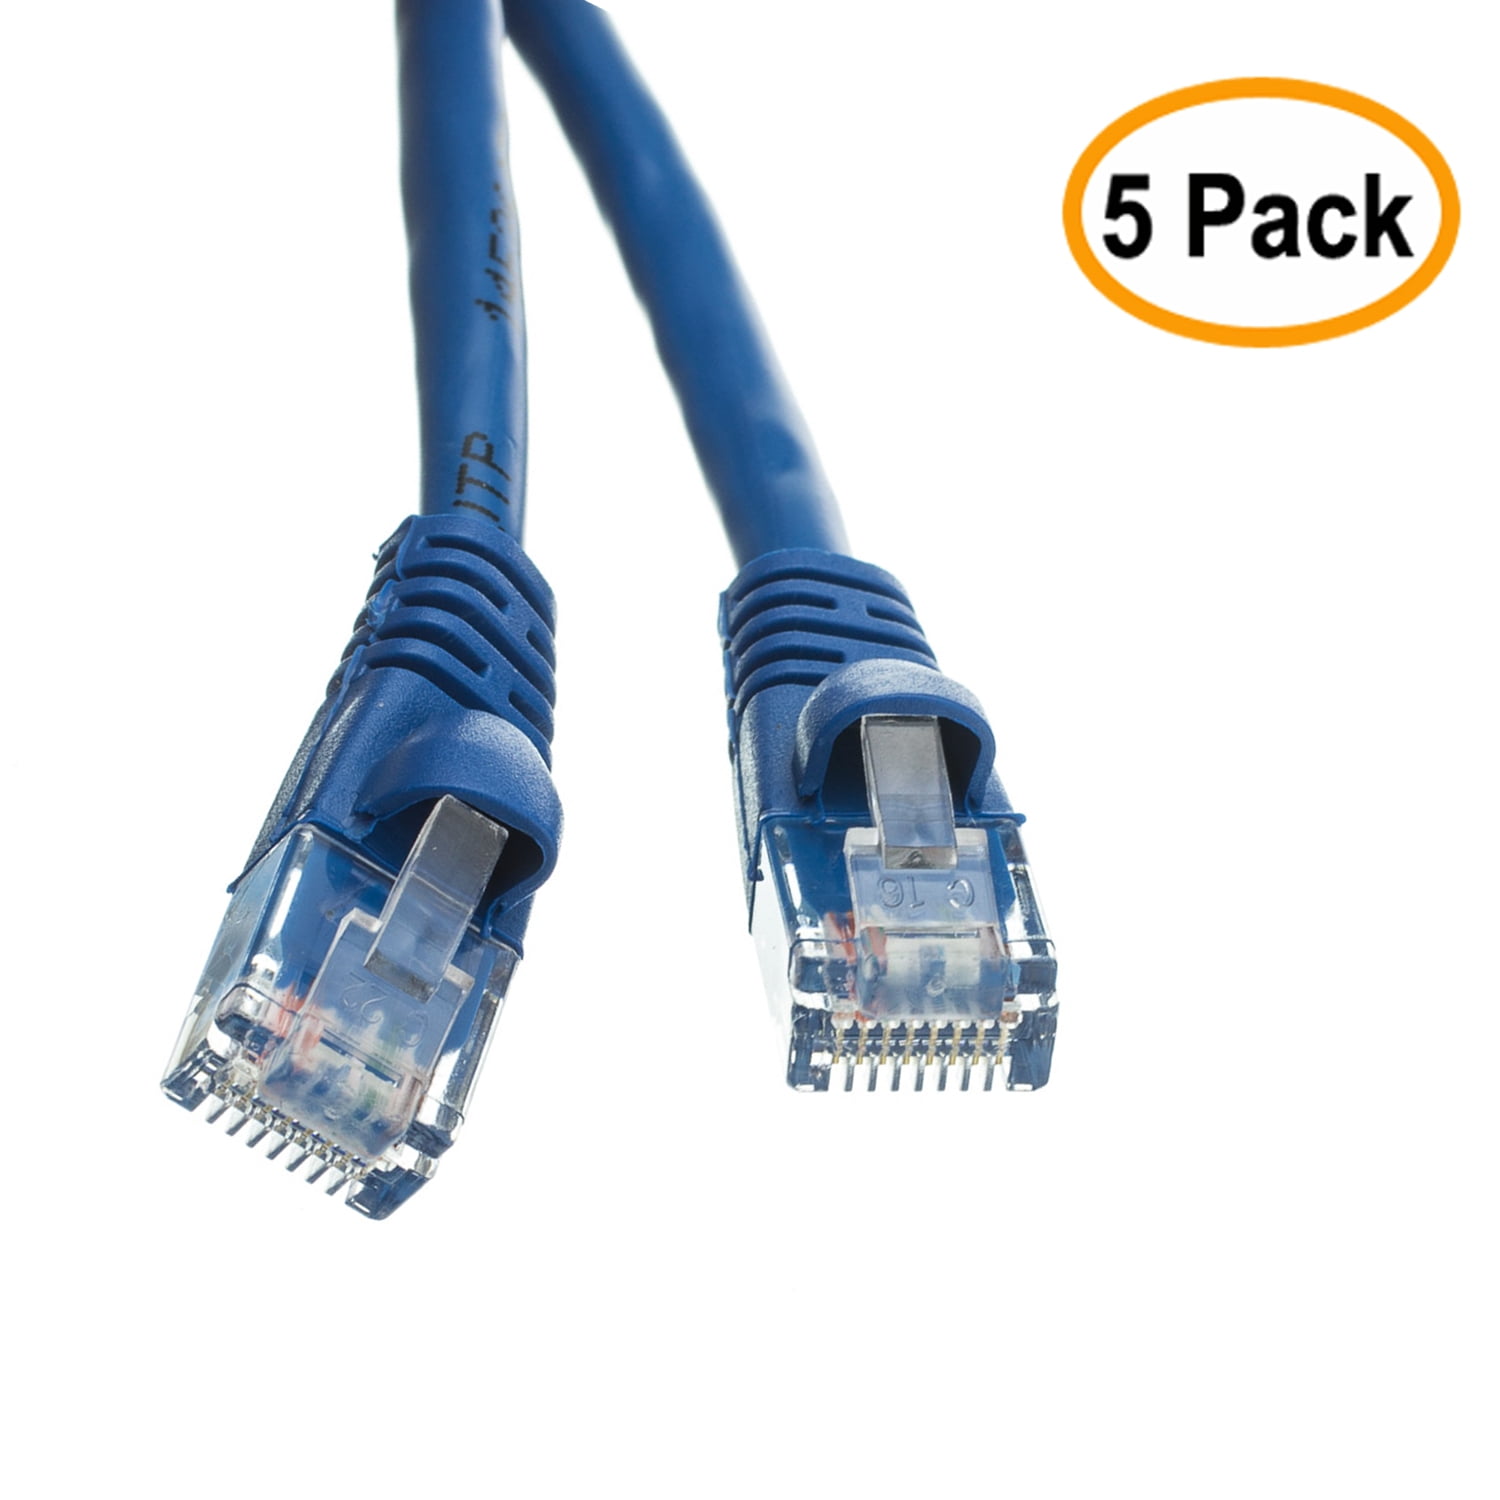 6 Inch eDragon Cat5e Ethernet Patch Cable with Snagless/Molded Boot, Blue, 2 Pack 